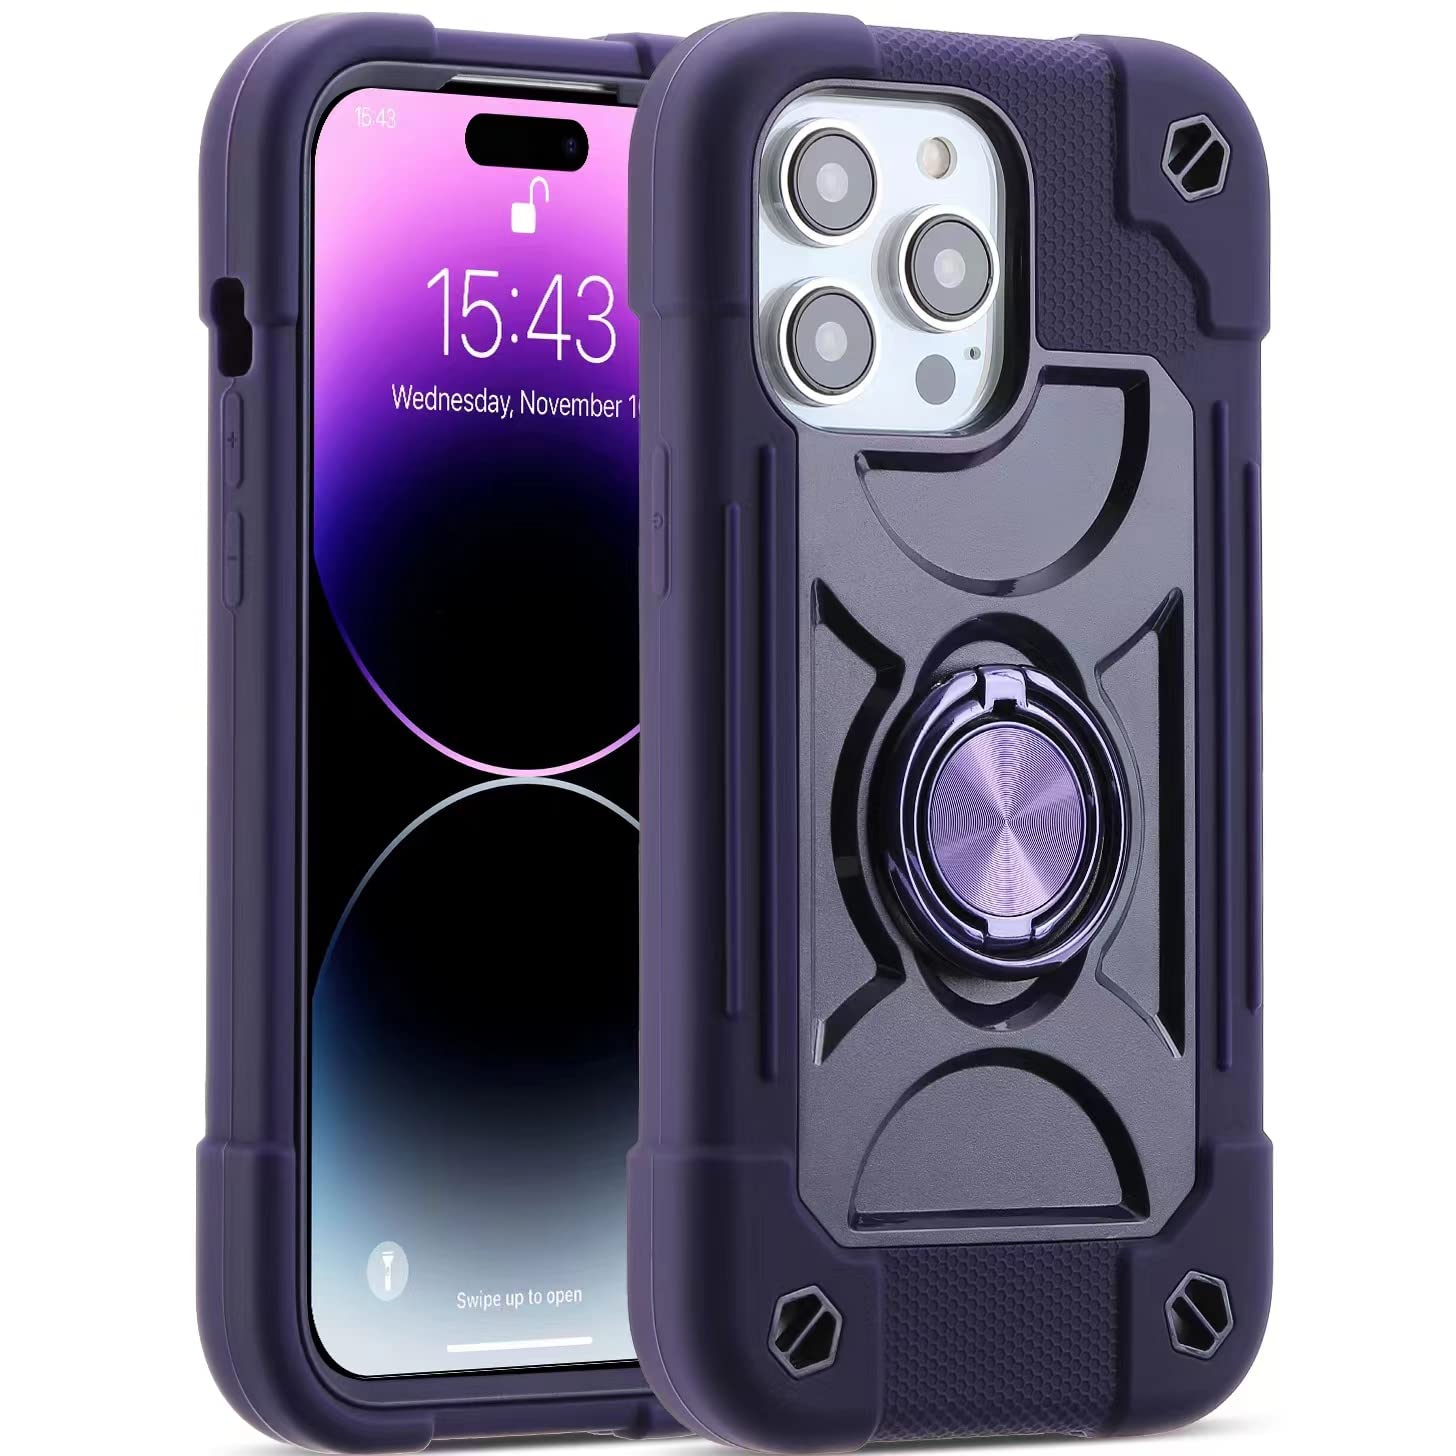 MARKILL Compatible with iPhone 14 Pro Max Case 6.7 Inch with Ring Stand, [Soft Silicone and Hard Plastic ] Heavy-Duty Military Grade Shockproof Phone Cover for iPhone 14 Pro Max. (Deep Purple)